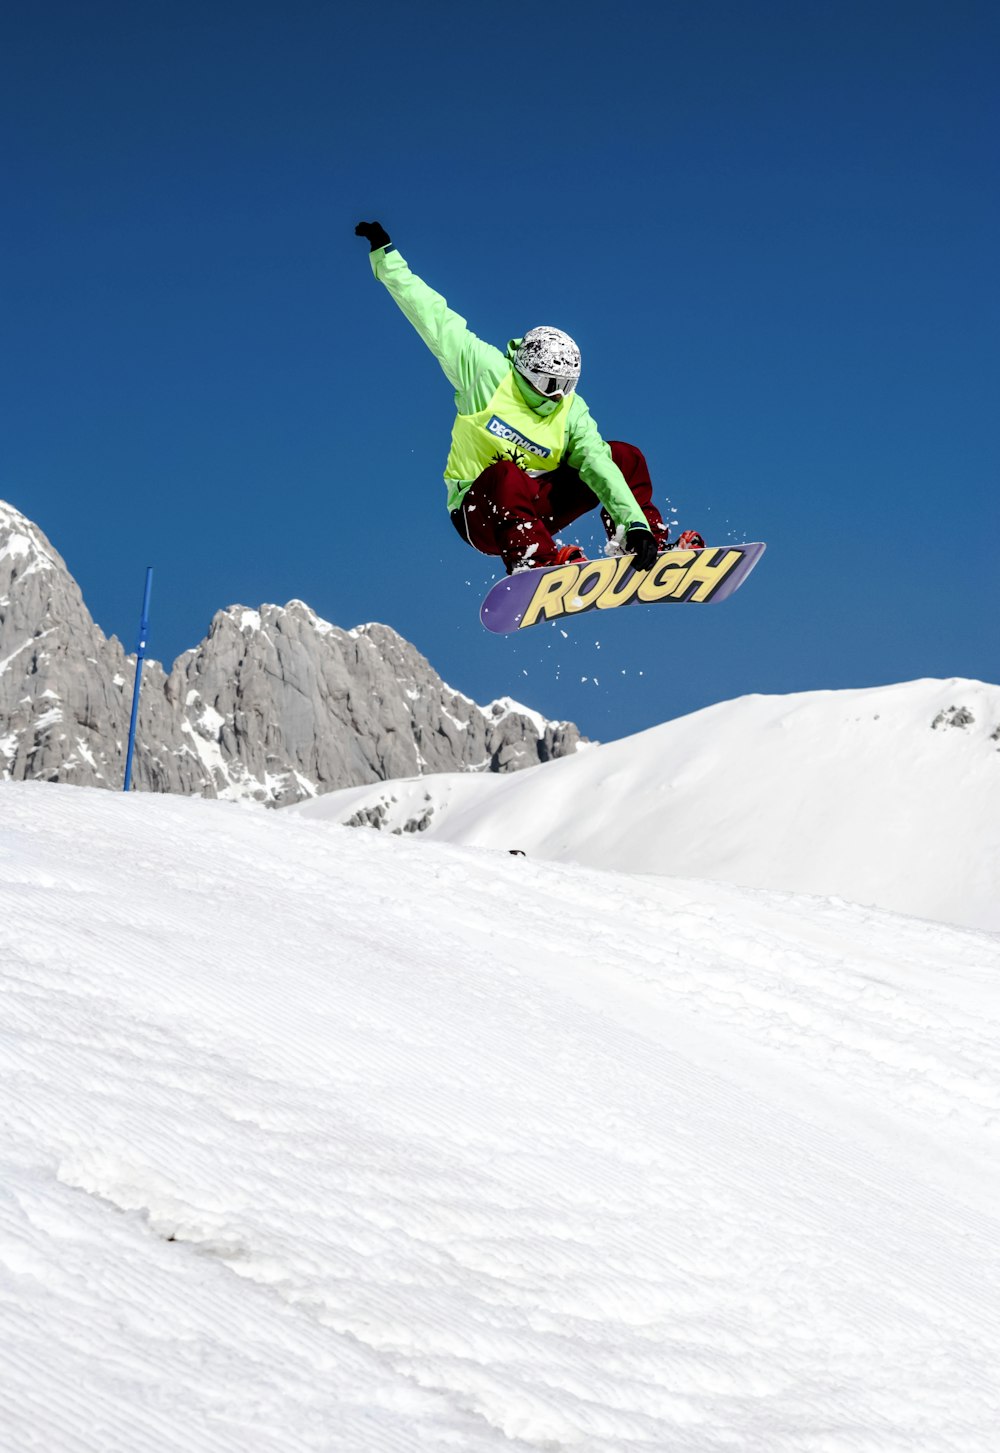 750+ Snowboard Pictures [HD] | Download Free Images on Unsplash